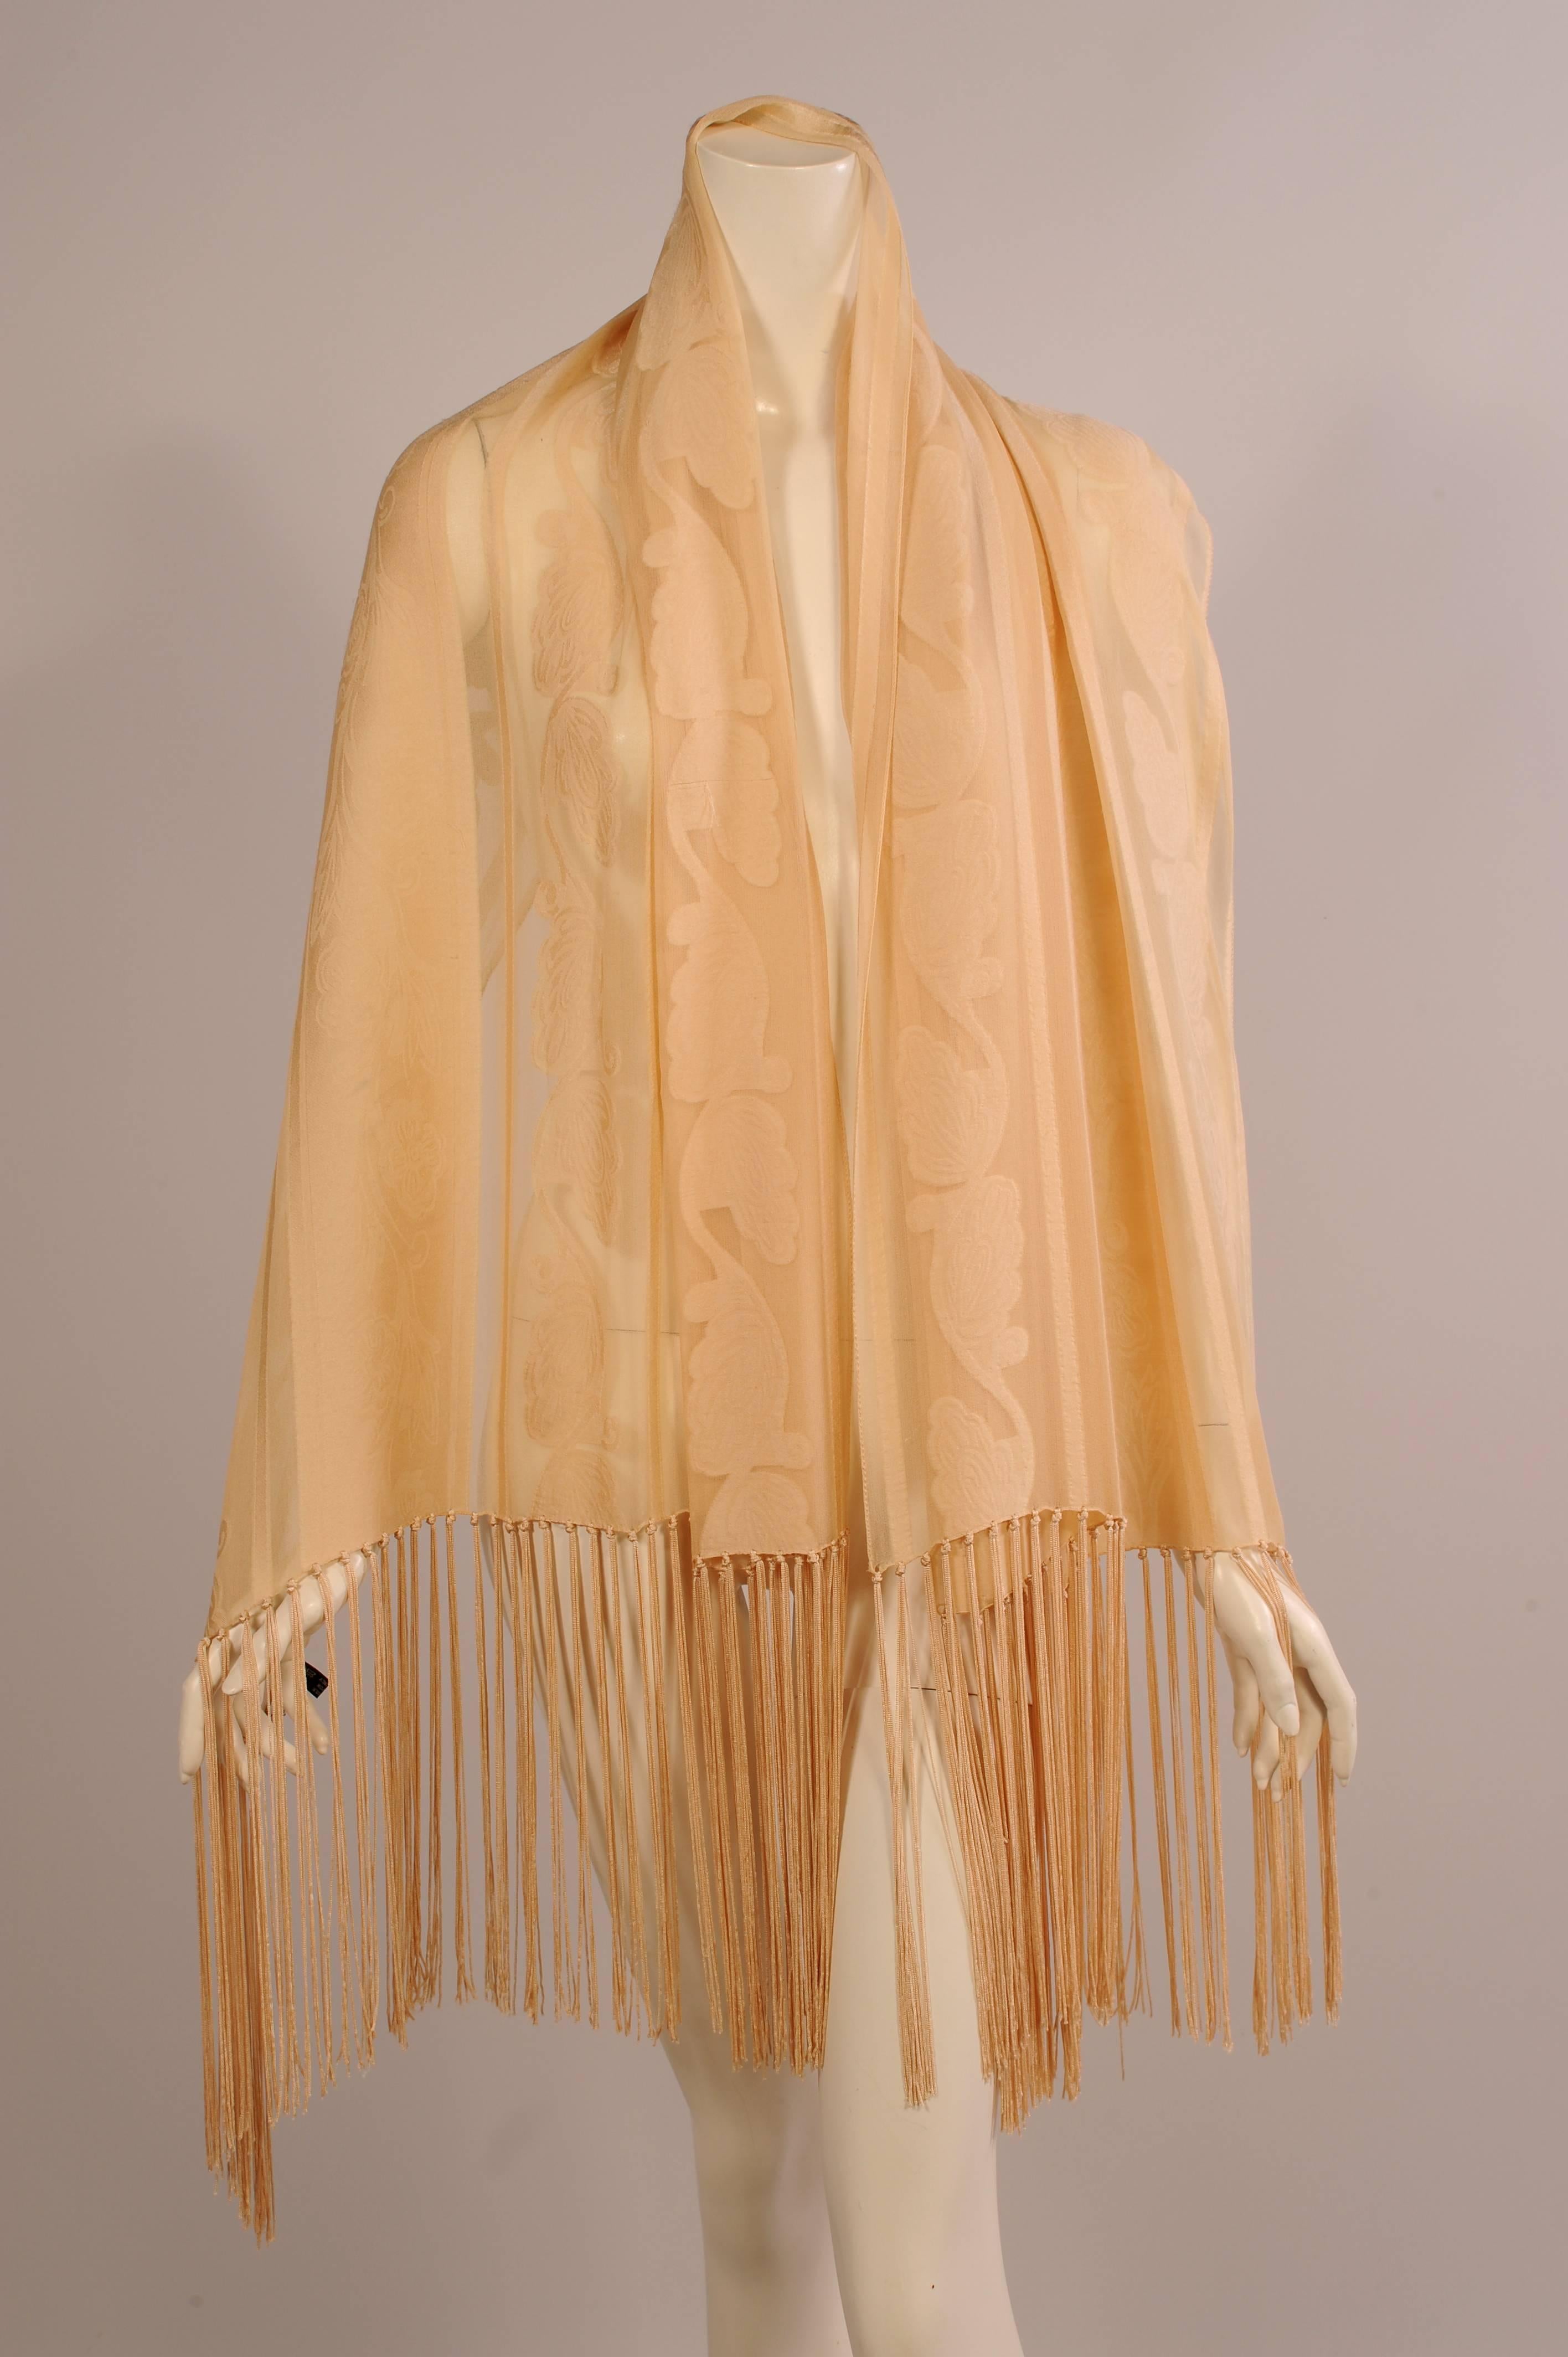 Beautifully woven sheer silk has narrow stripes and wide woven sylized vines, as well as wide wide woven bands with a floral vine. This elegant design is accented with ten inches of silk fringe at each end. This lovely shawl is in excellent